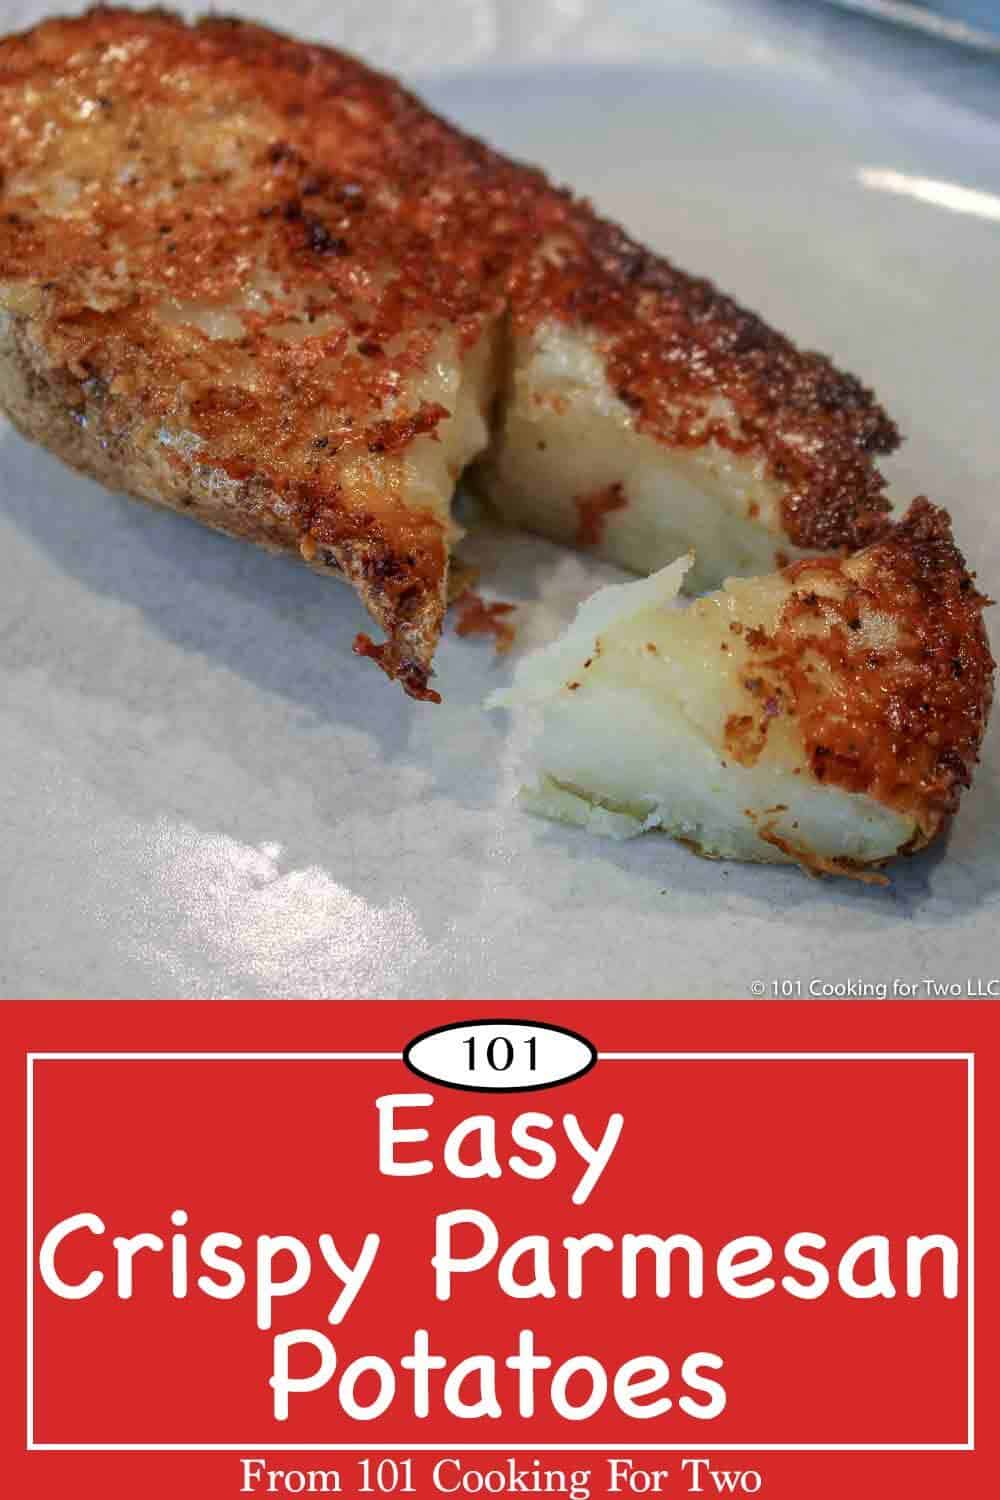 Meet your new favorite side dish, crispy parmesan crusted potato half infused with garlic and butter. Just follow these easy step by step photo instructions. #CrispyParmesanPotatoes #CrispyParmesanBakedPotatoes #ParmesanPotatoes